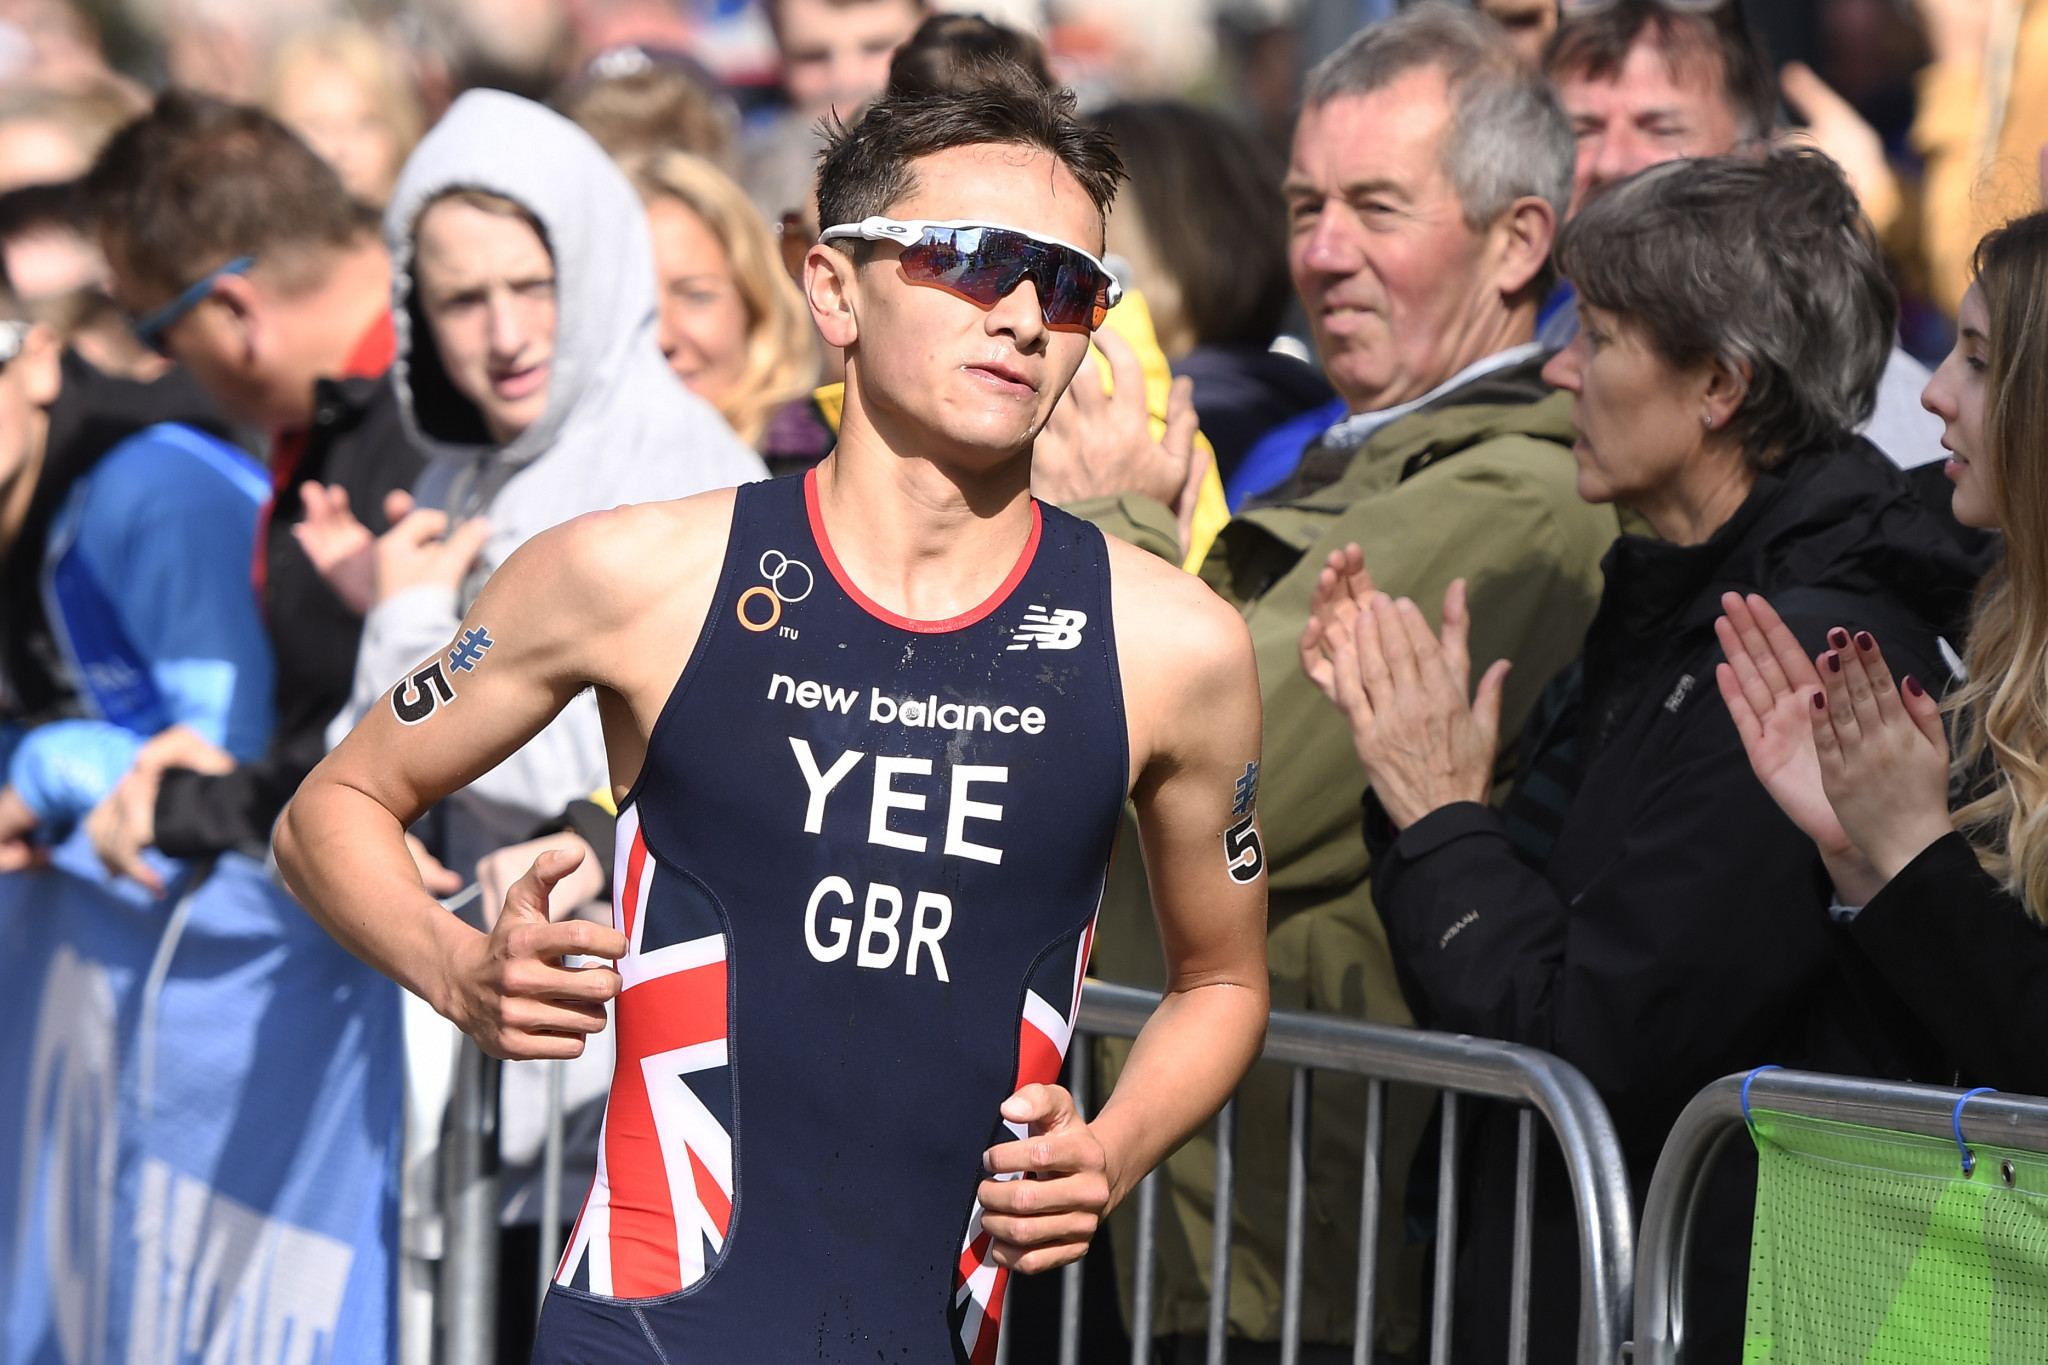 Britain's Alex Yee is looking for a return to form this weekend after a bad start in Munich earlier this month ©Getty Images